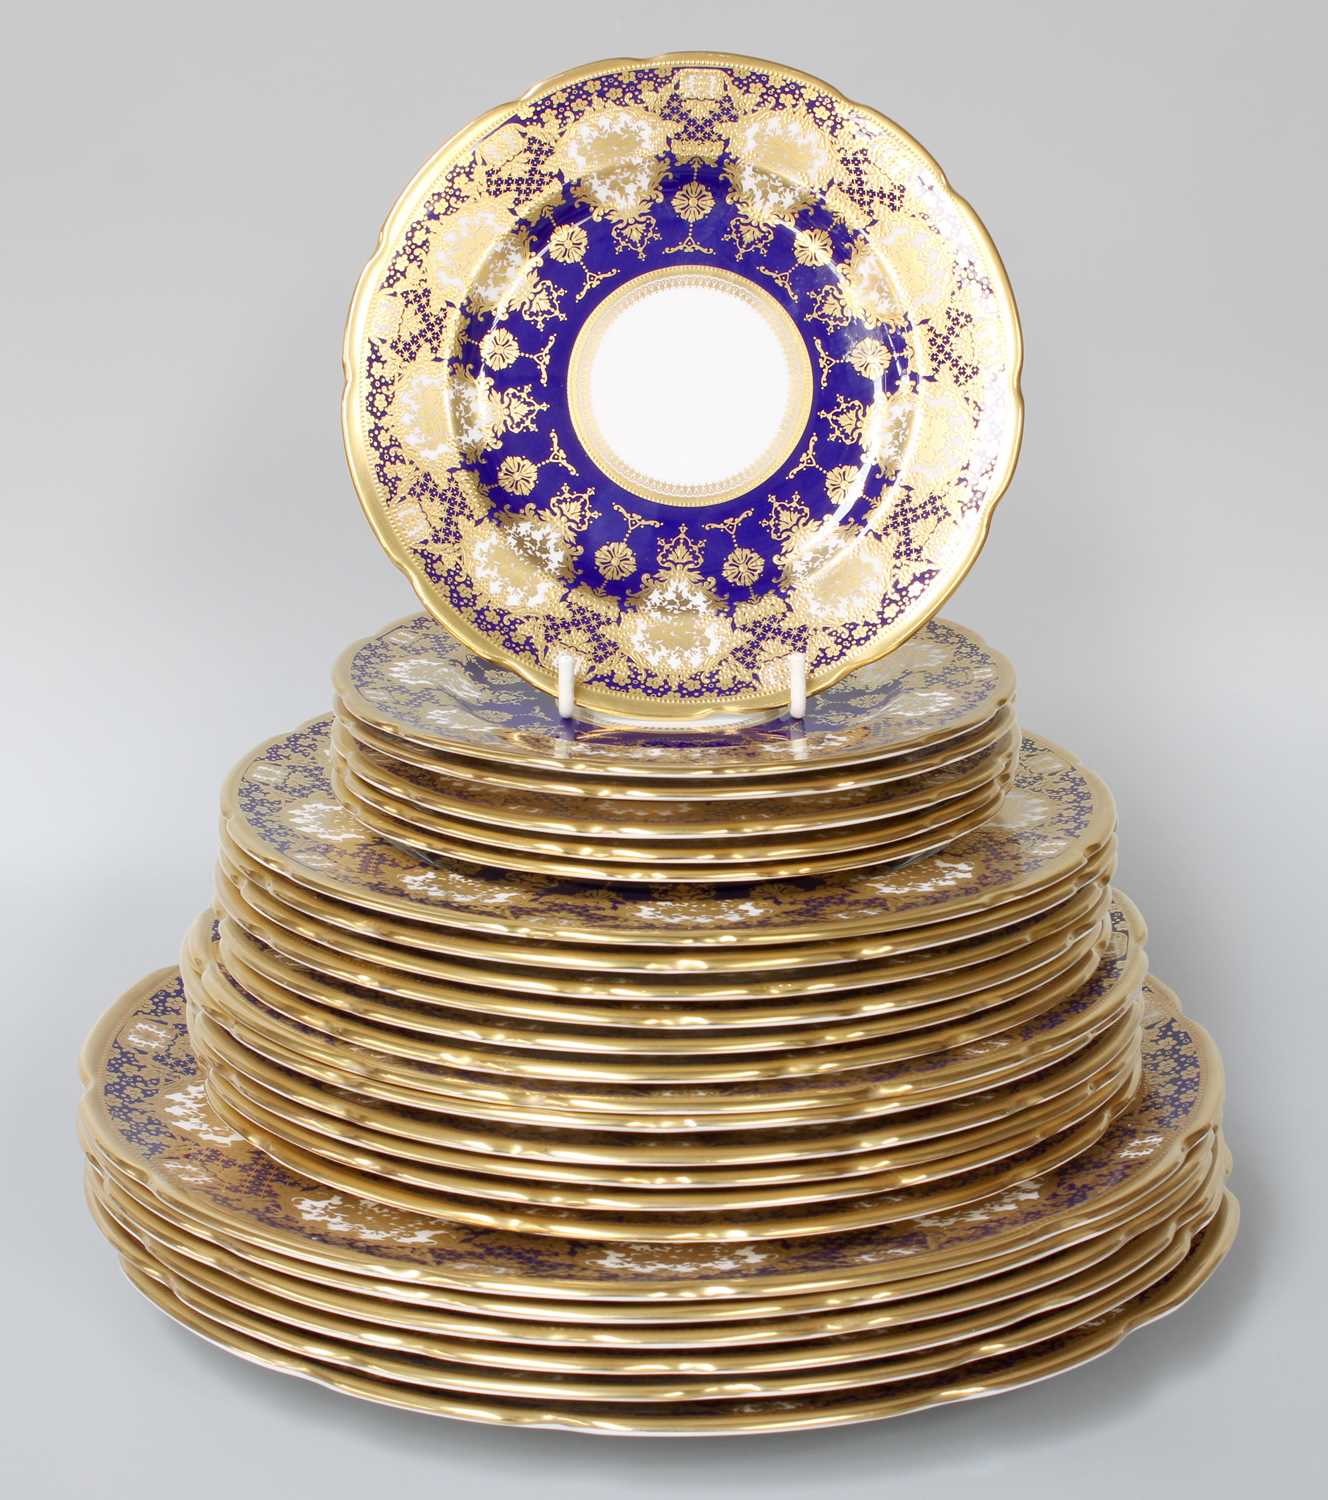 A Thomas Goode Marquis de Mos Pattern Dinner Service, with Thomas Goode booklet and purchase - Image 2 of 3